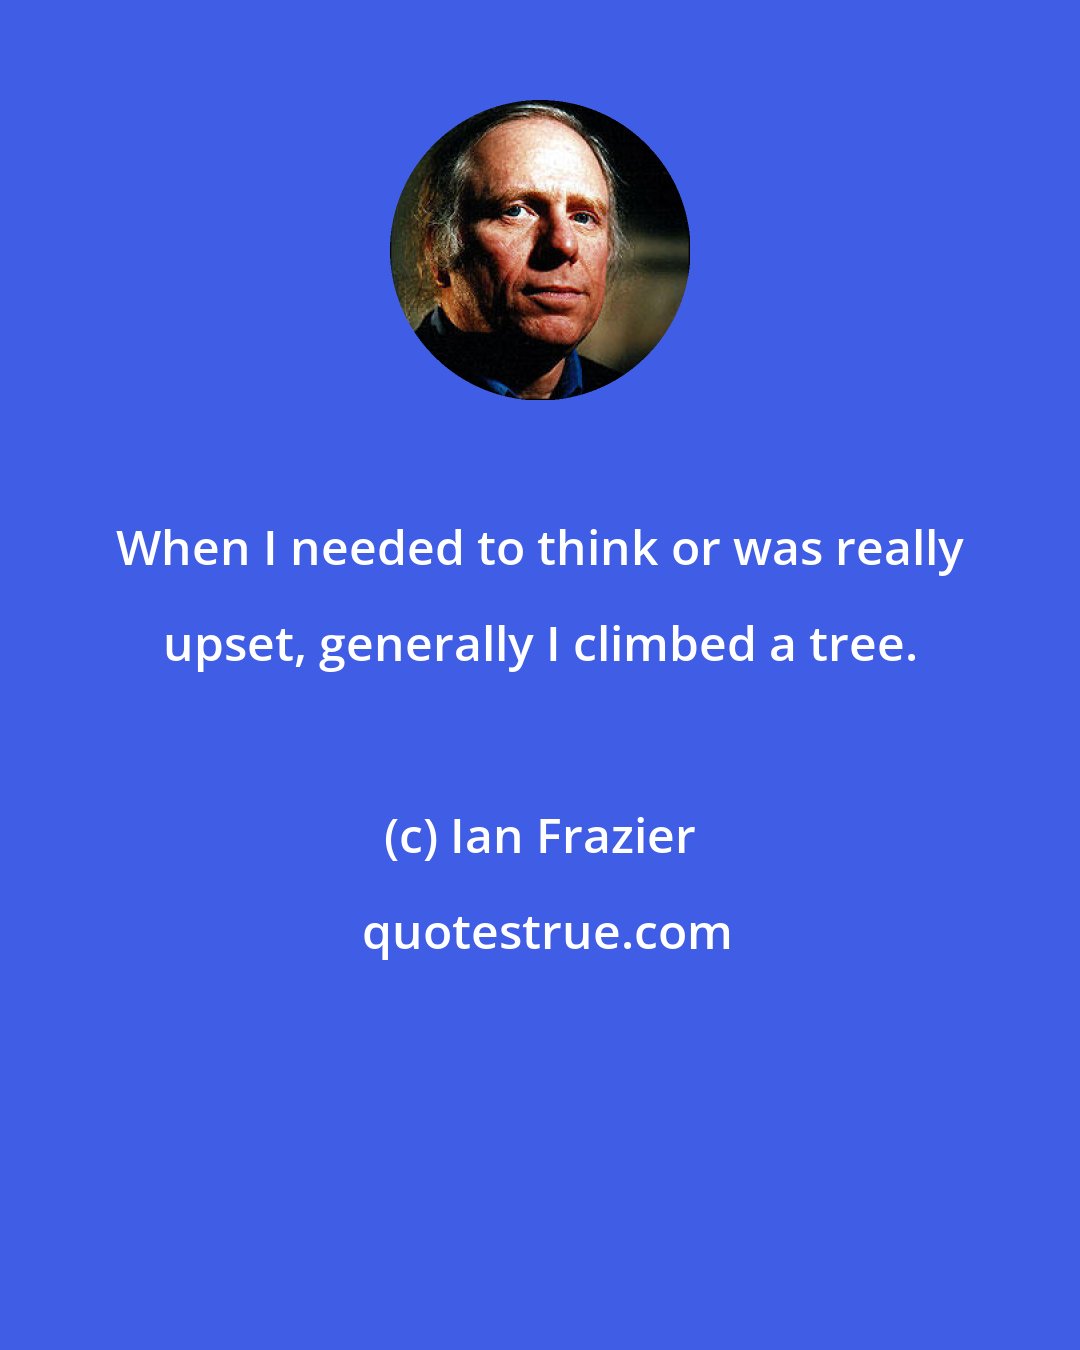 Ian Frazier: When I needed to think or was really upset, generally I climbed a tree.